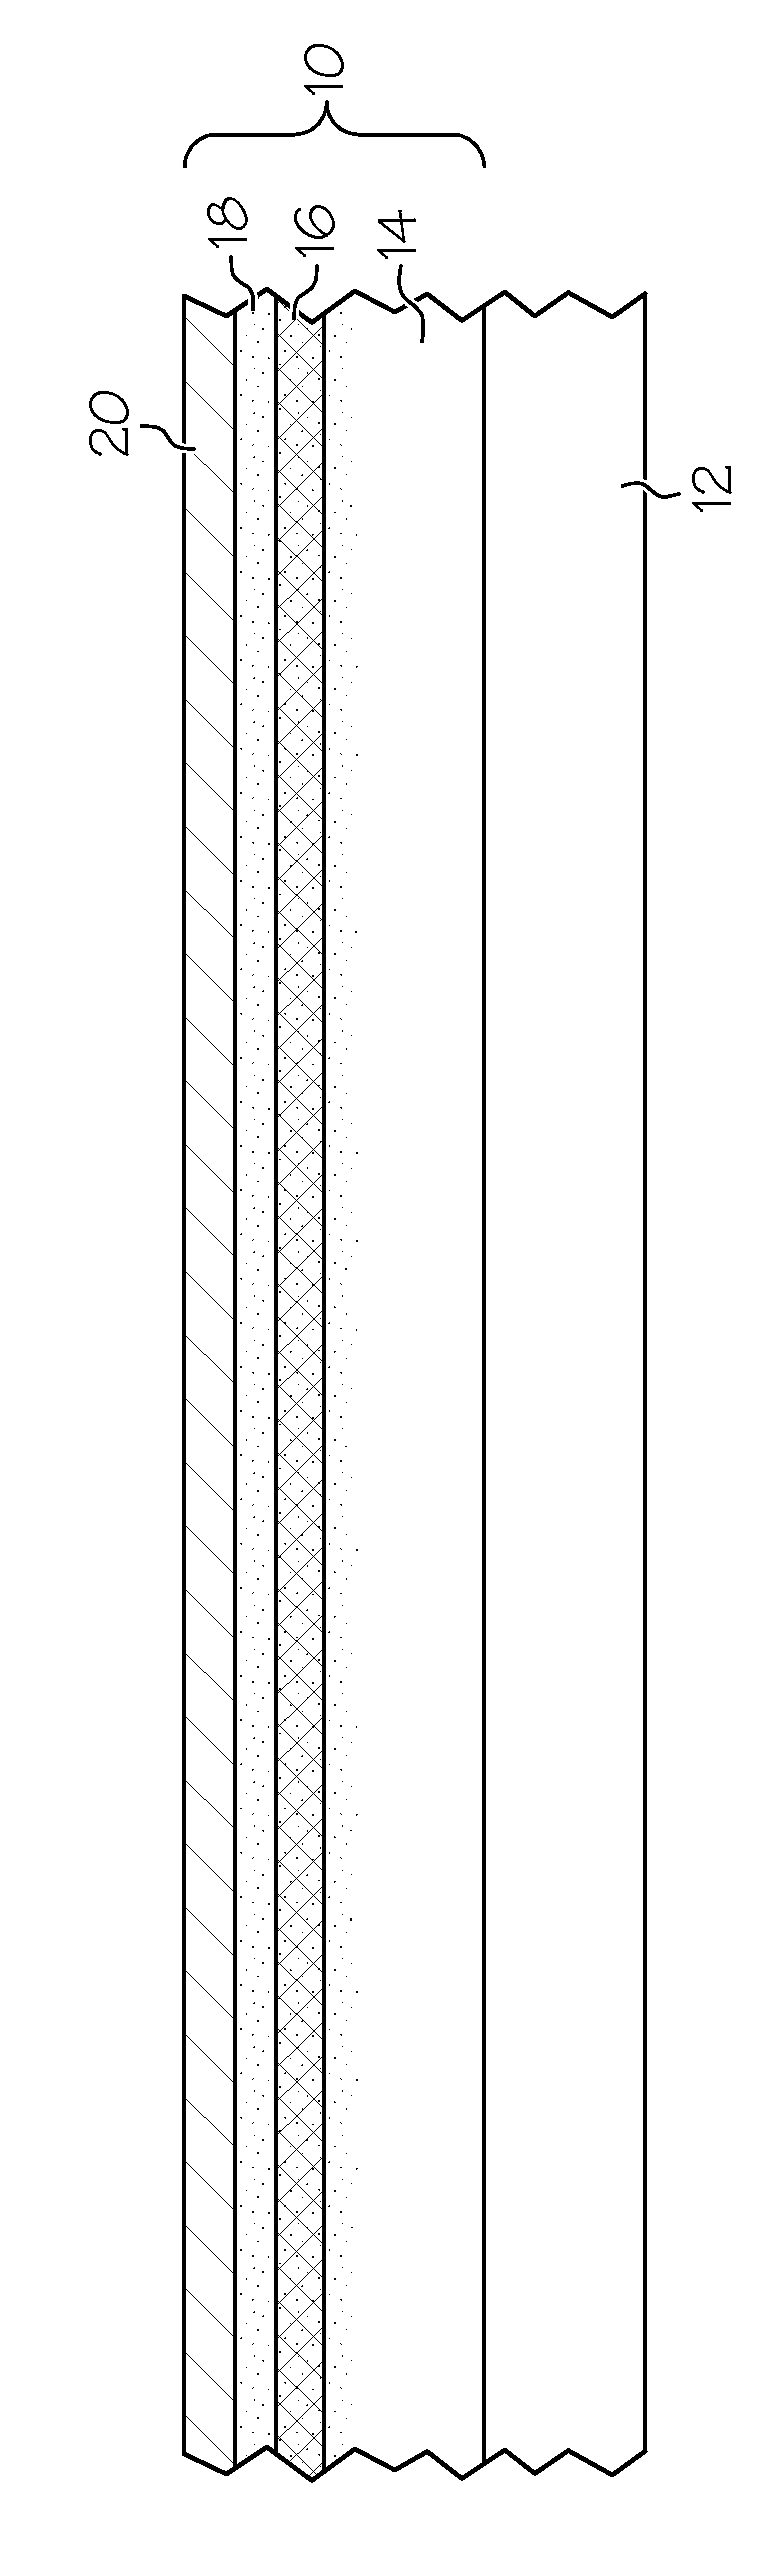 Method of treating paint waste and roofing products containing paint waste